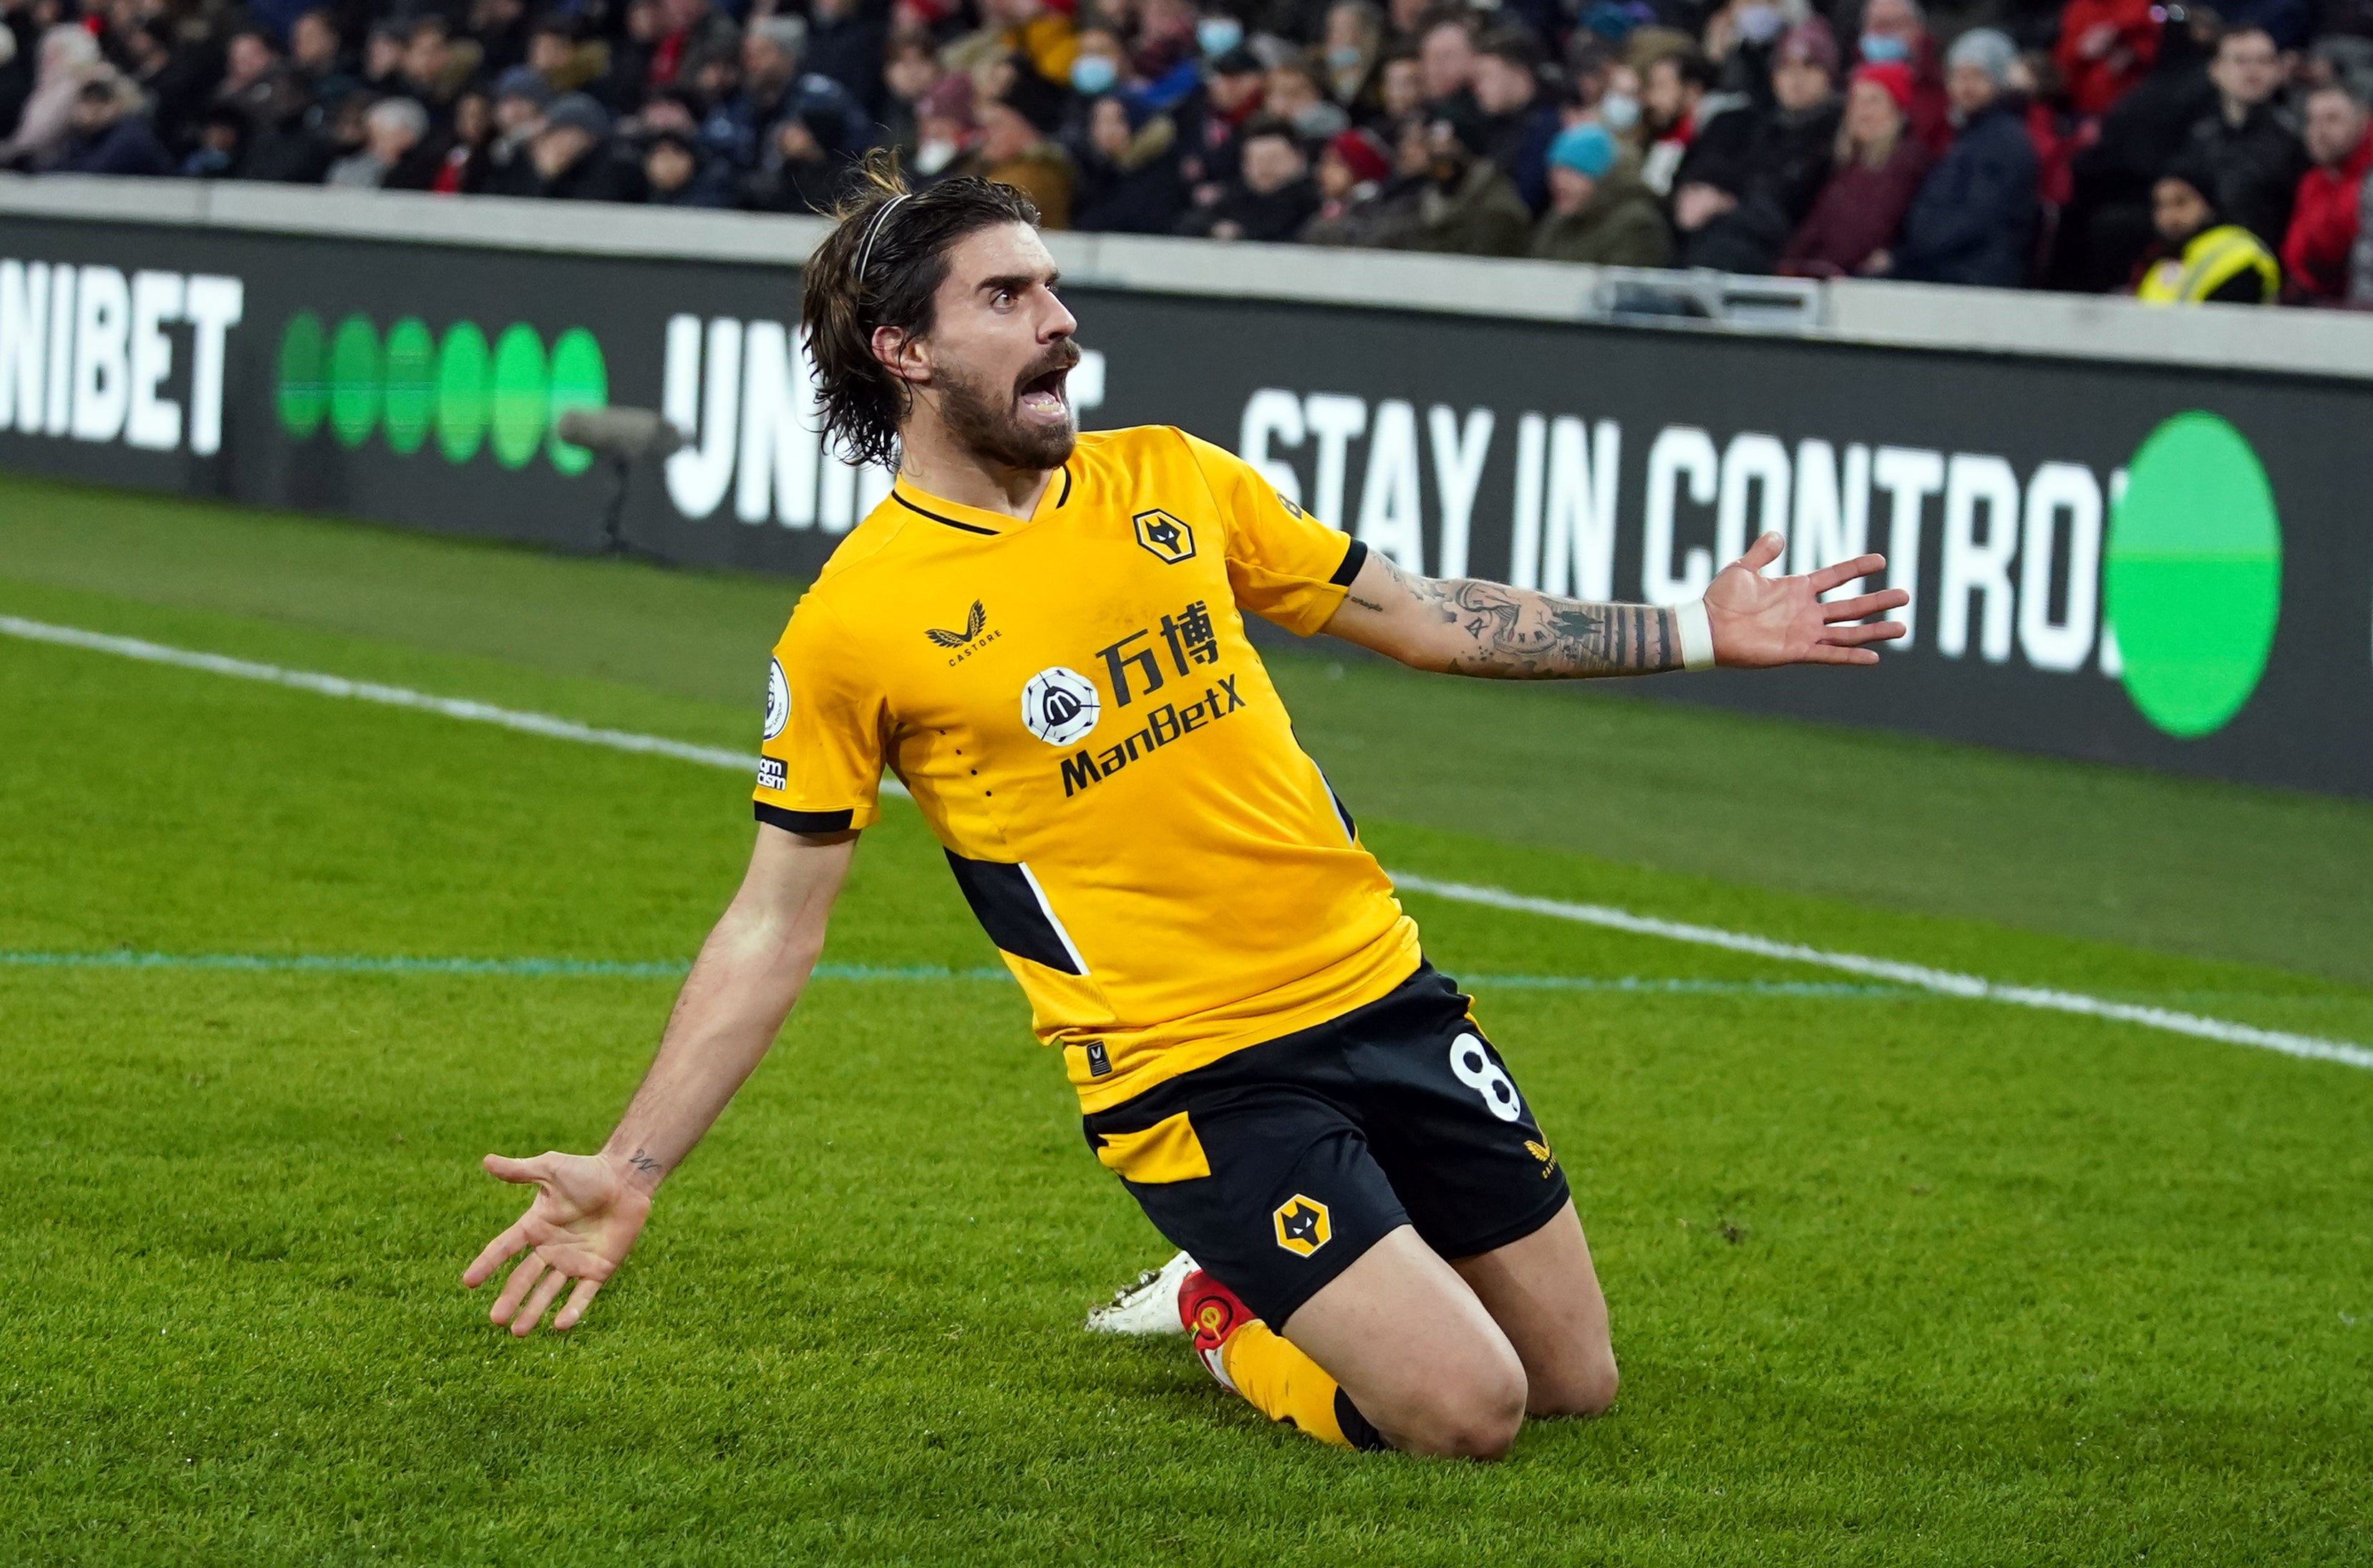 Wolves midfielder Ruben Neves scored the opening goal of the win over Leicester City. (Nick Potts/PA)